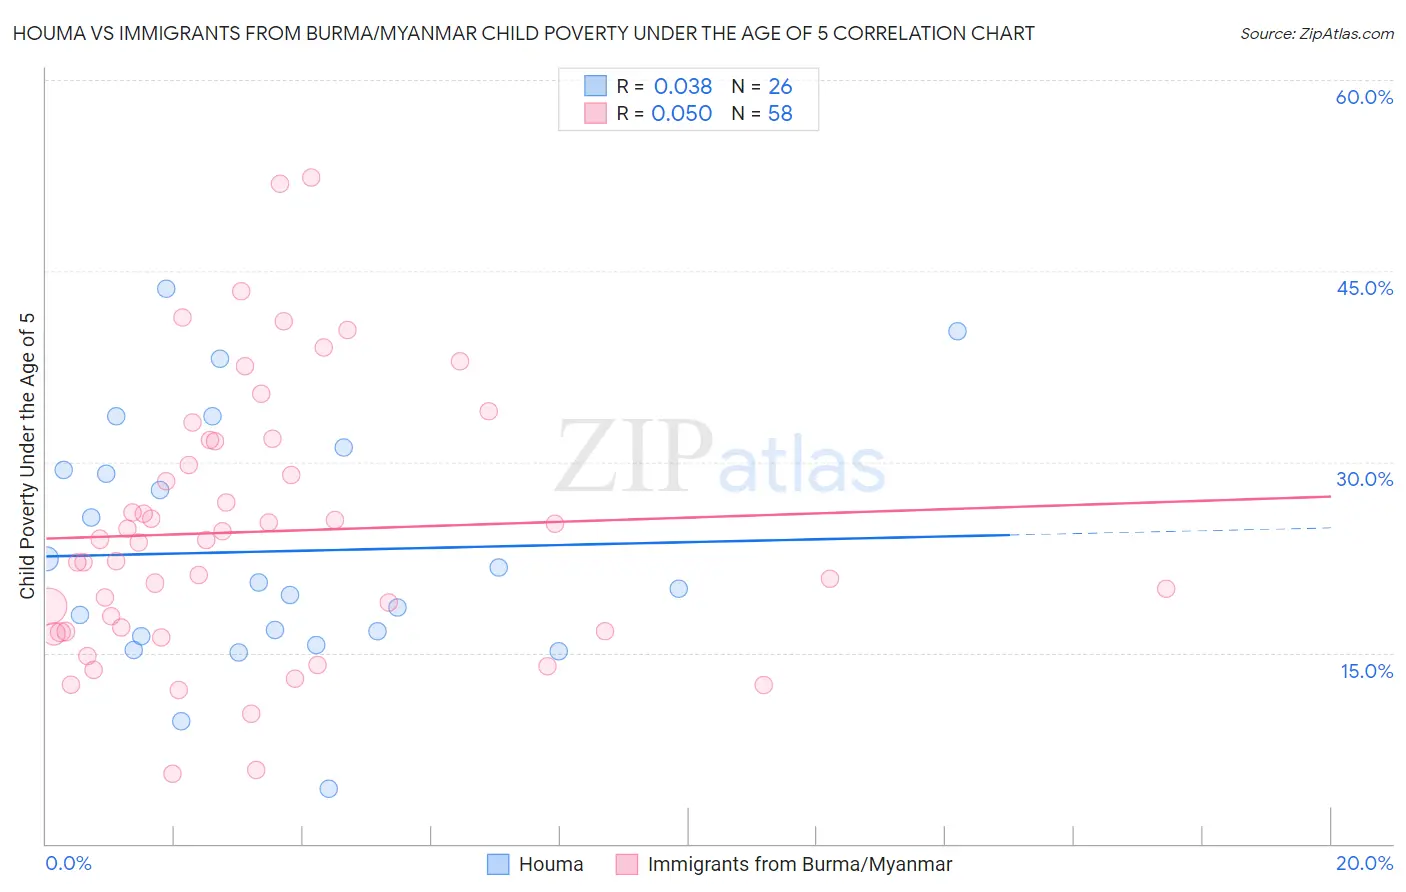 Houma vs Immigrants from Burma/Myanmar Child Poverty Under the Age of 5